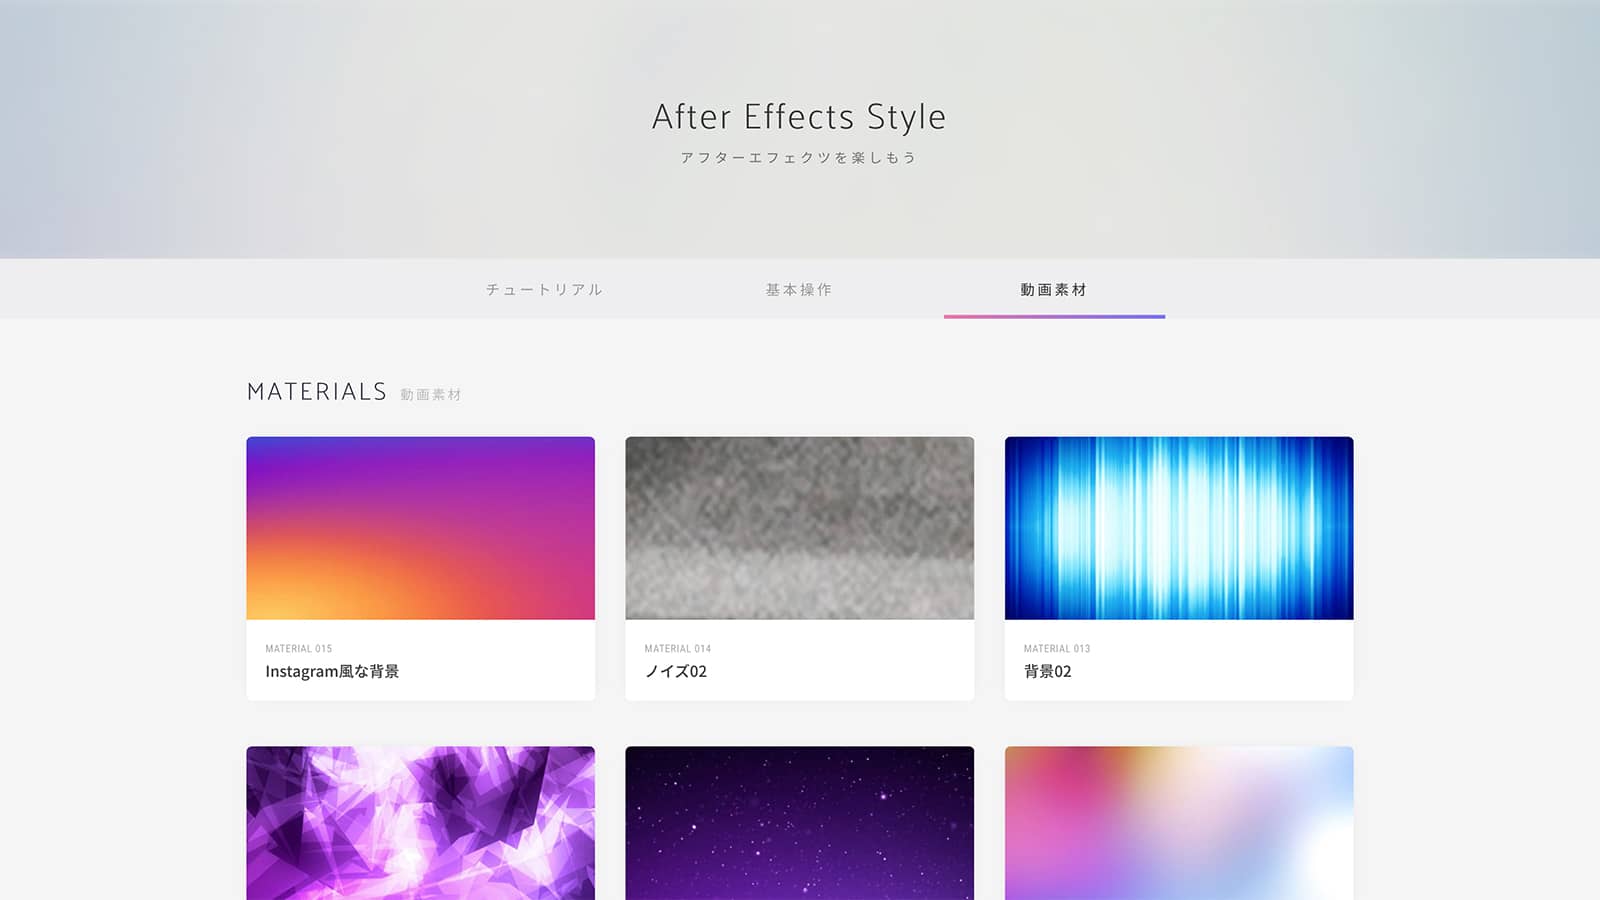 After Effects Style